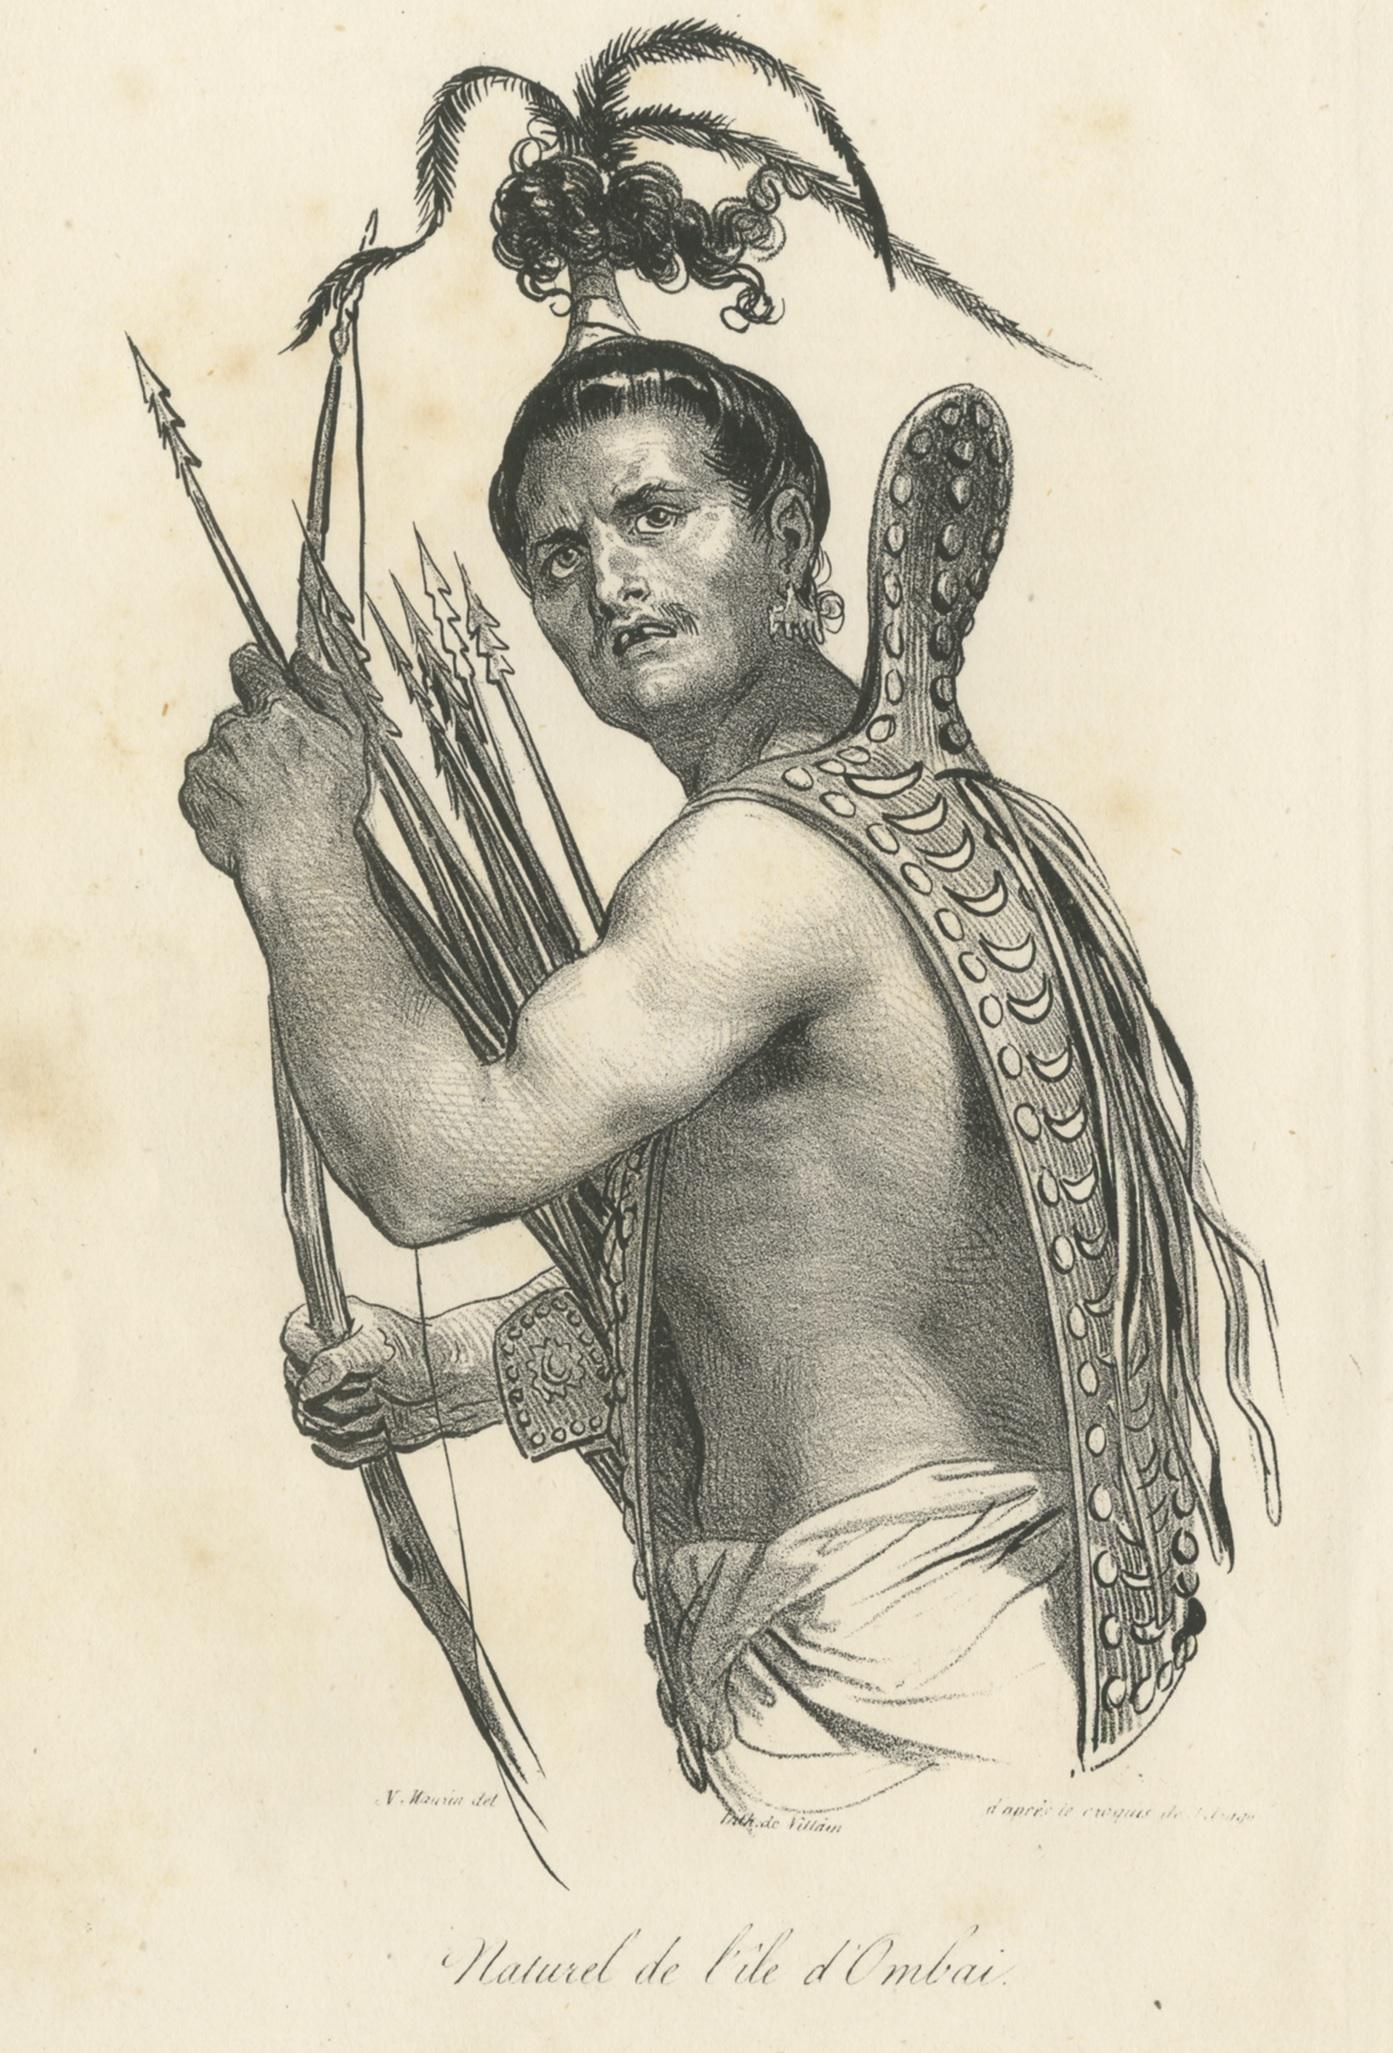 Antique print titled 'Naturel de l'ile d'Ombai'. Lithograph of a native of the Ombai Strait, Indonesia. Source unknown, to be determined. Published, circa 1840.